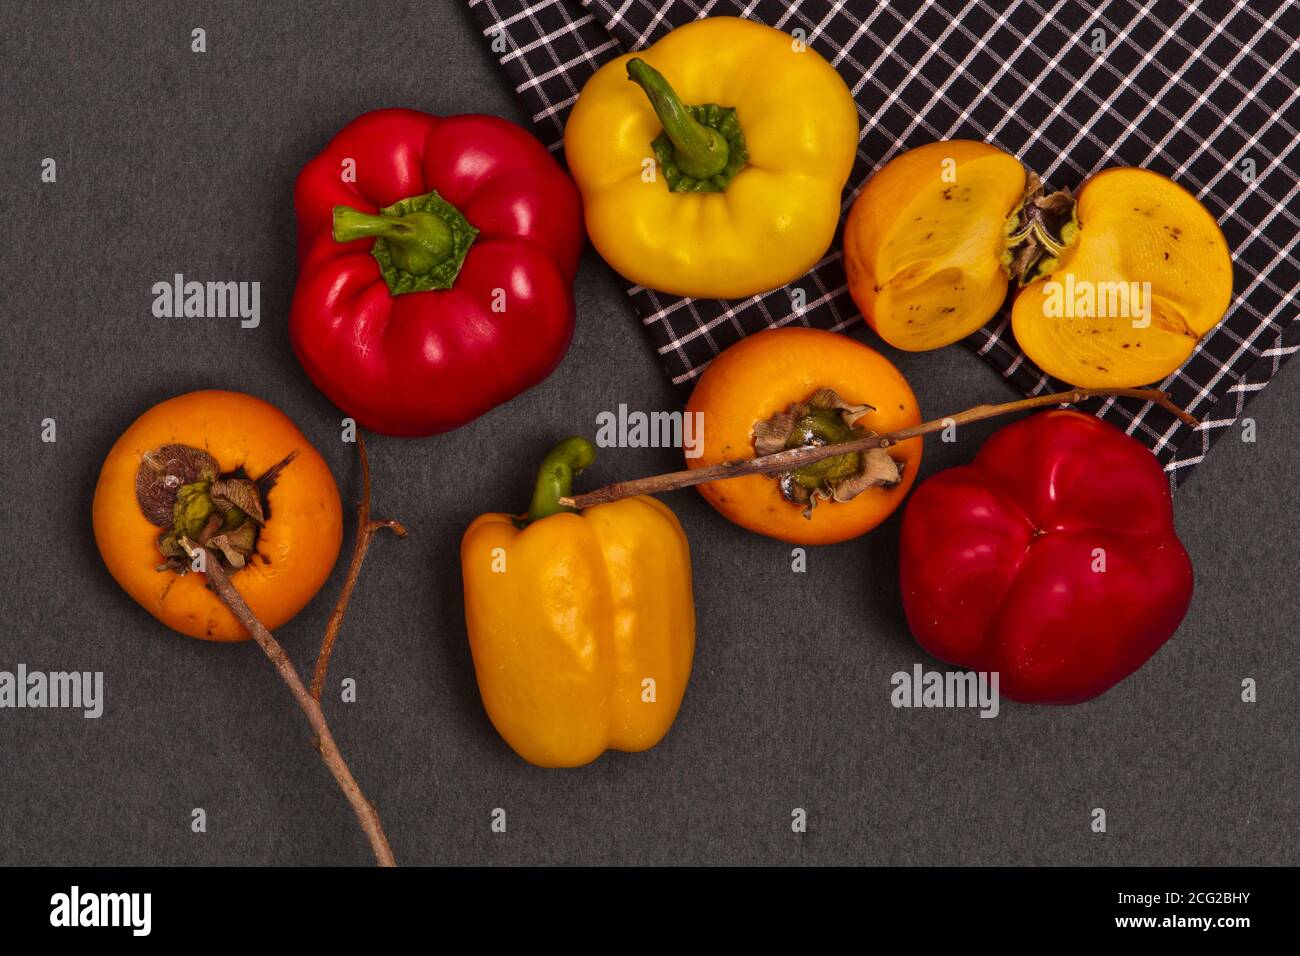 peppers and persimmons Stock Photo